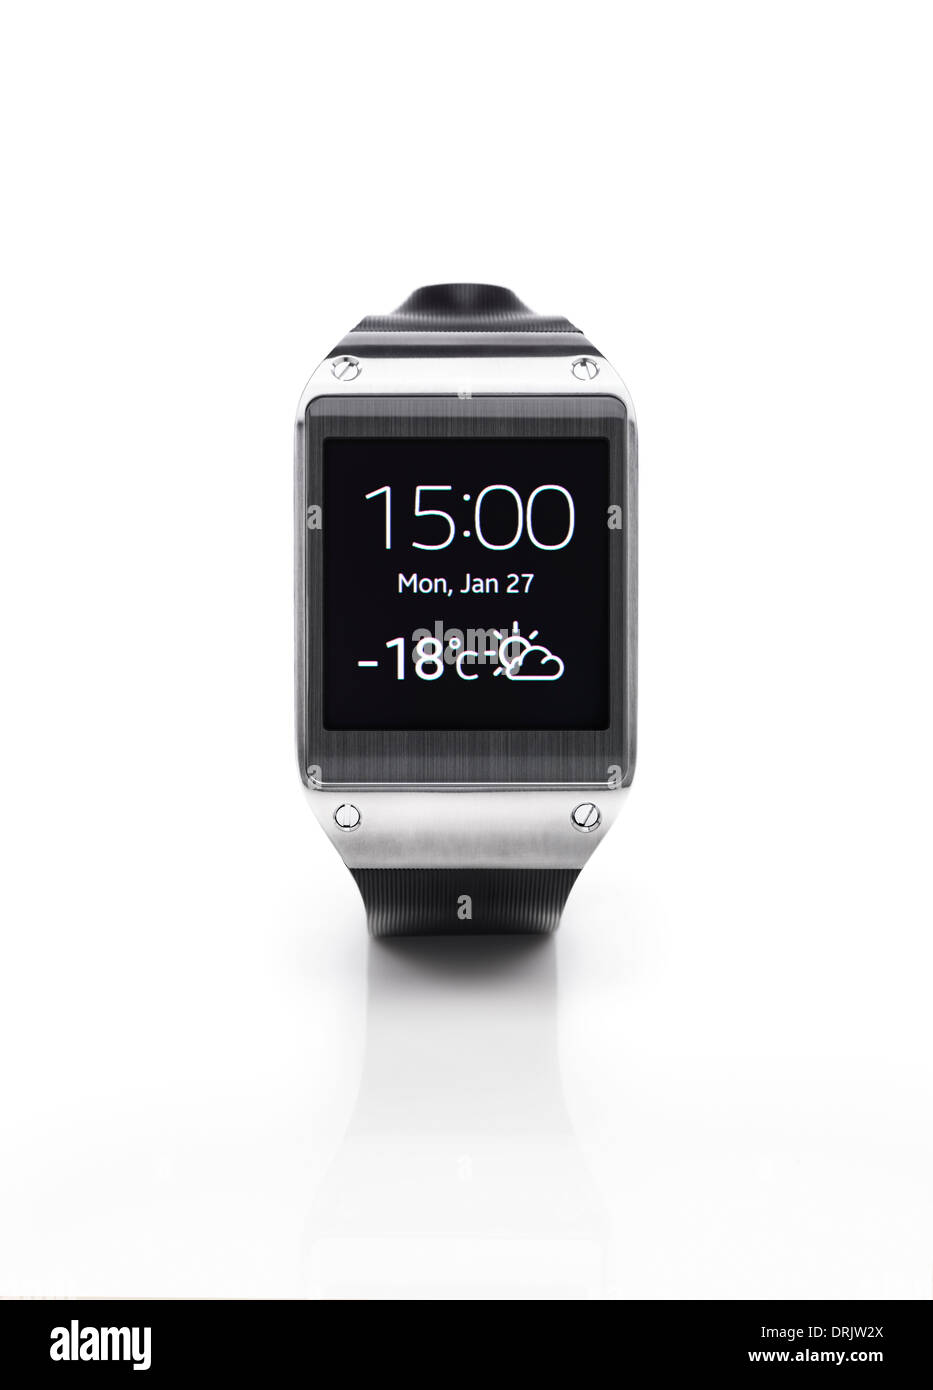 Samsung Galaxy Gear smartwatch showing time and weather. Isolated watch on white background with clipping path. Stock Photo